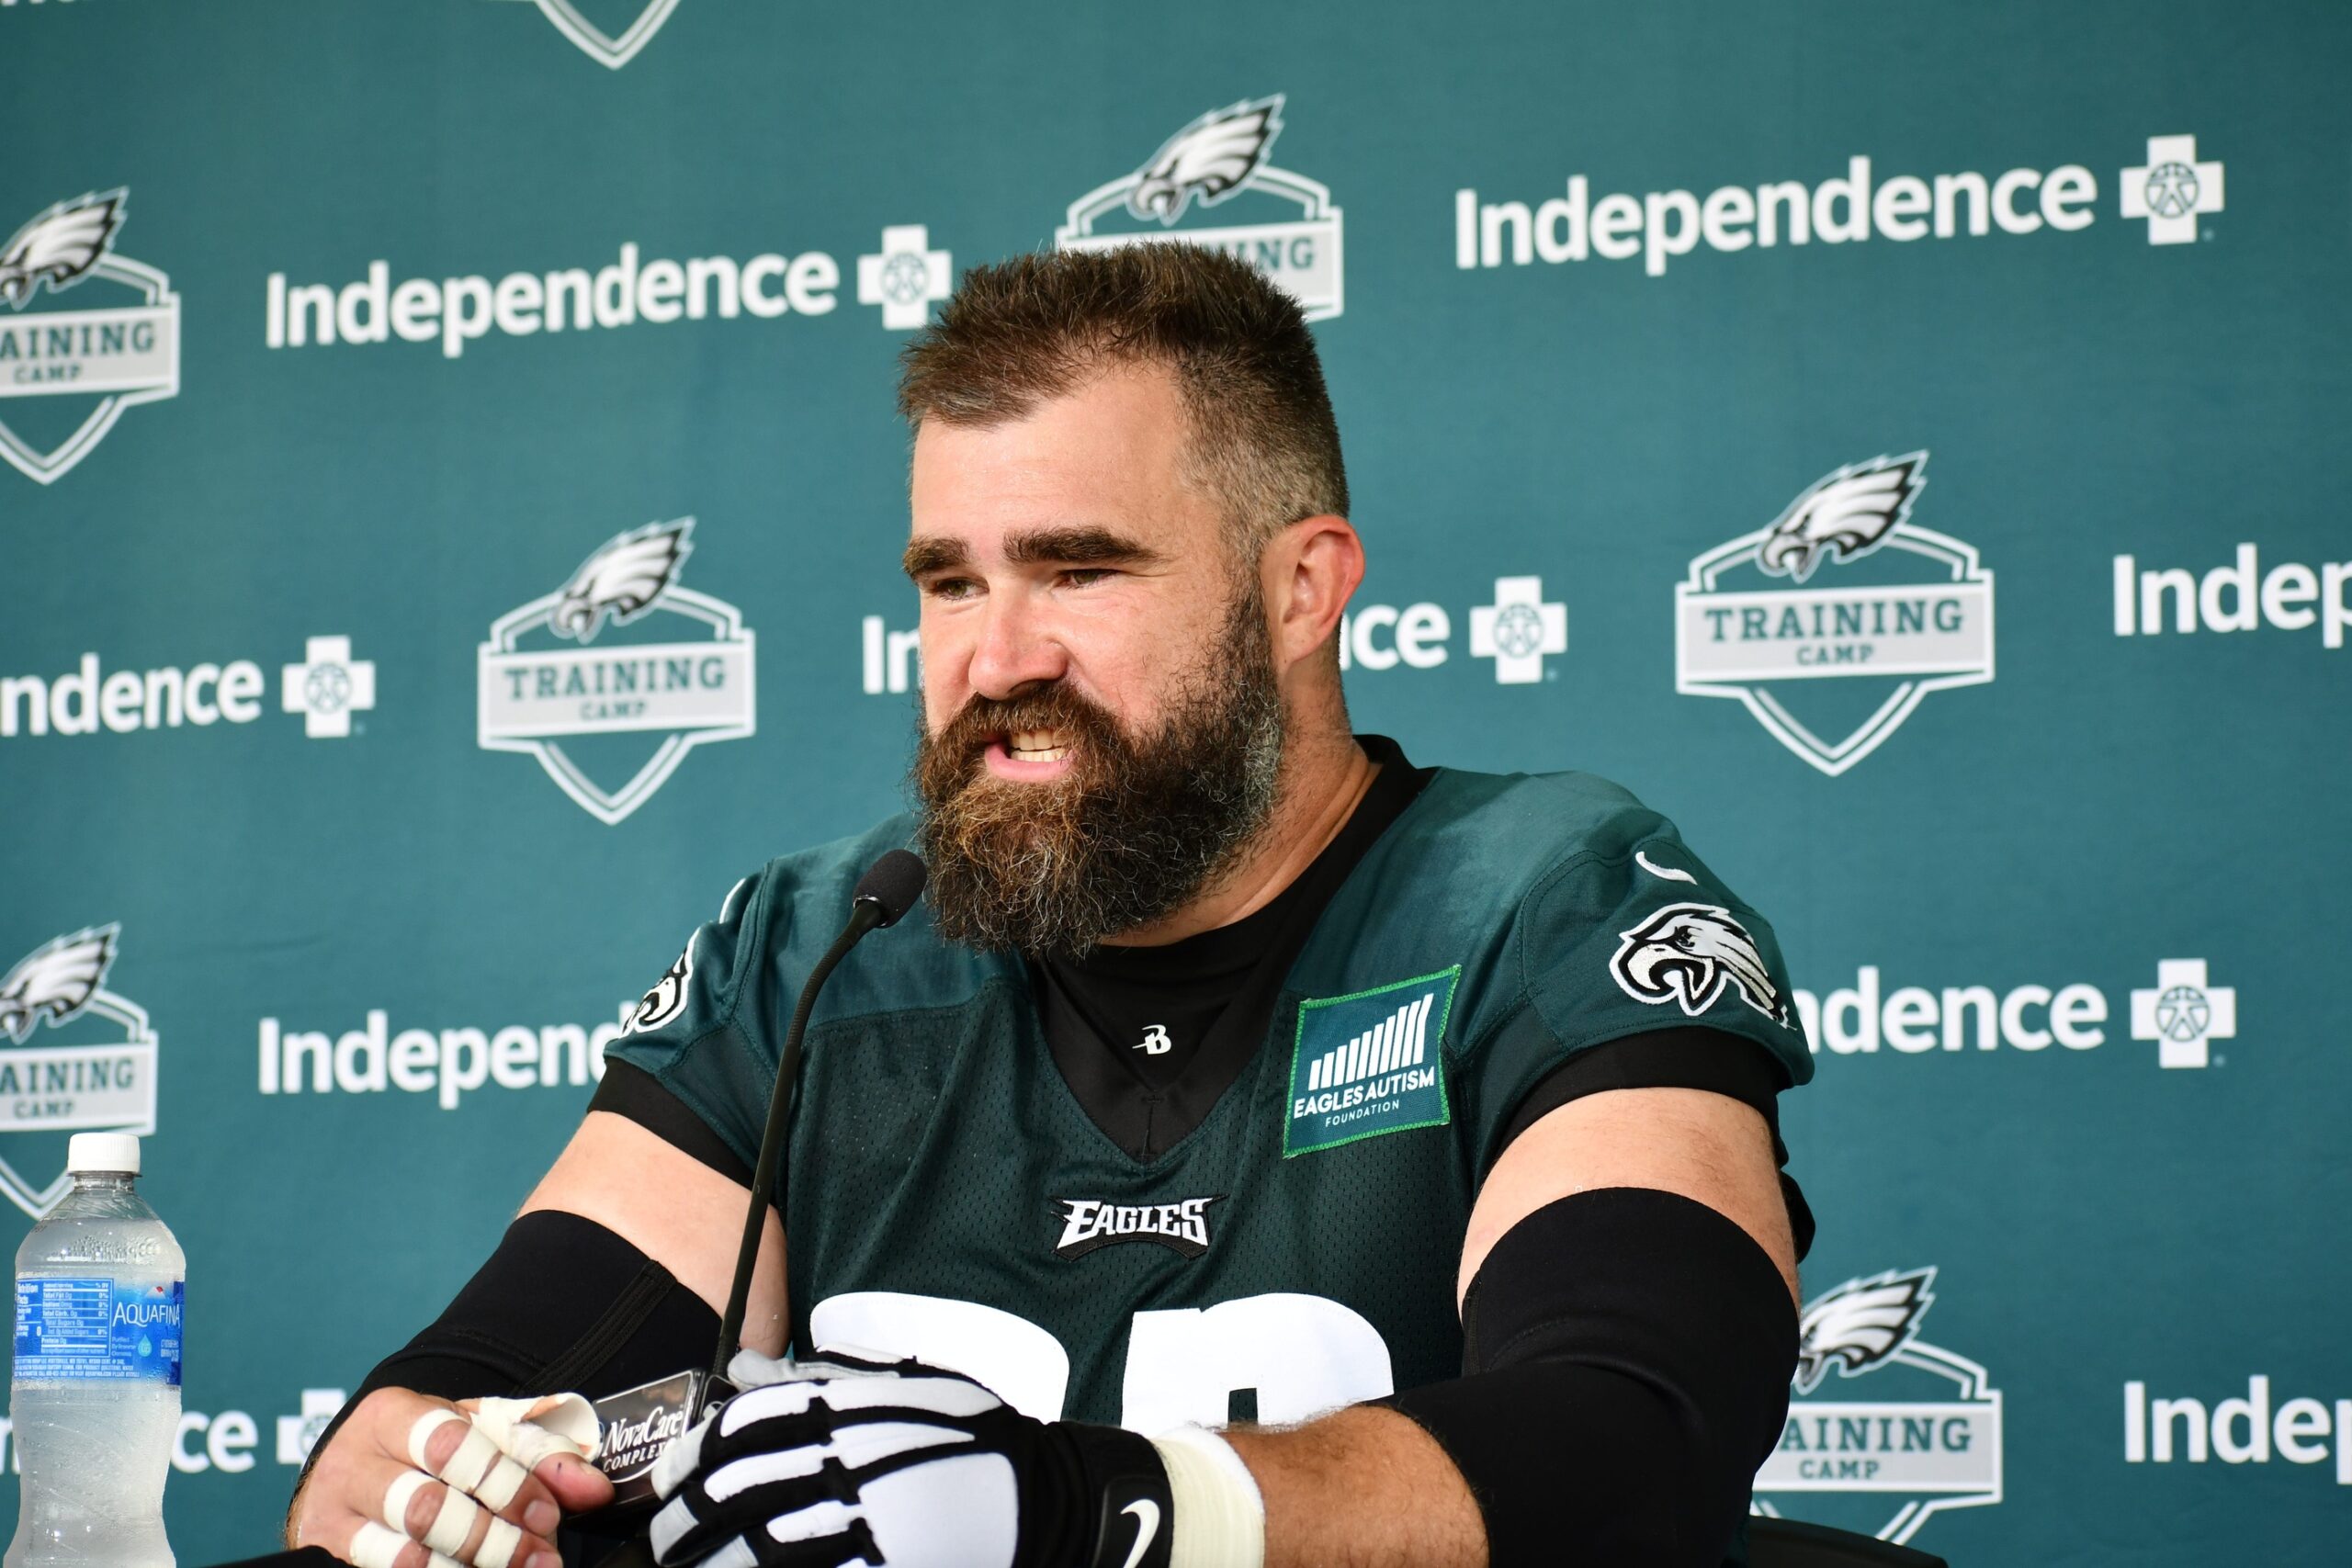 How To Watch the 'Kelce' Documentary: Start Time, TV Channel, Live